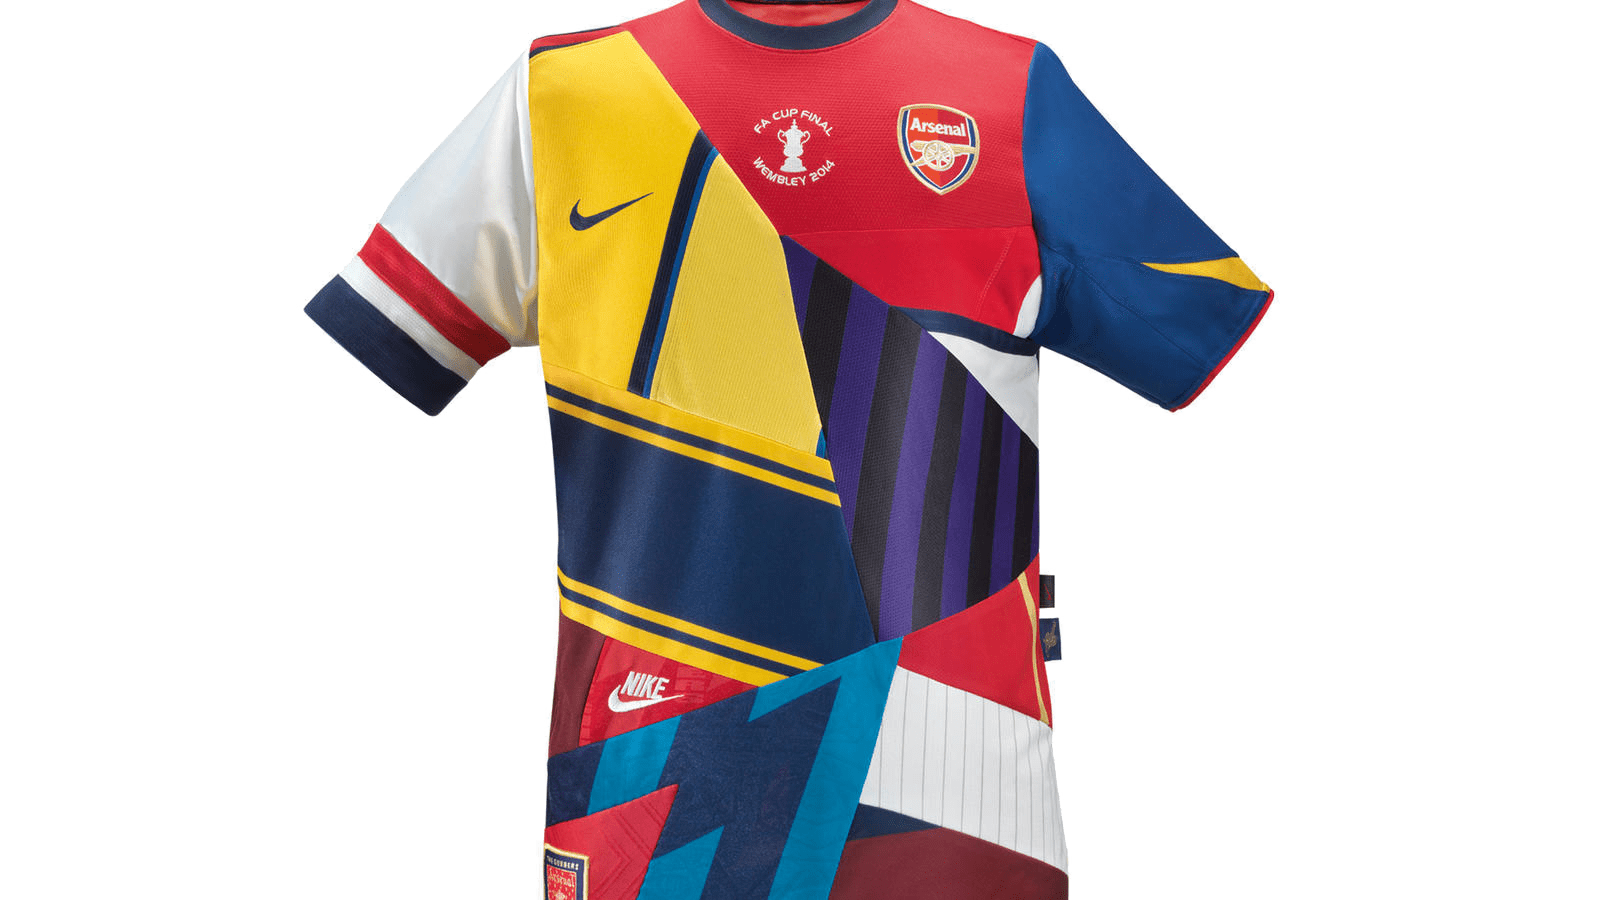 arsenal jersey images